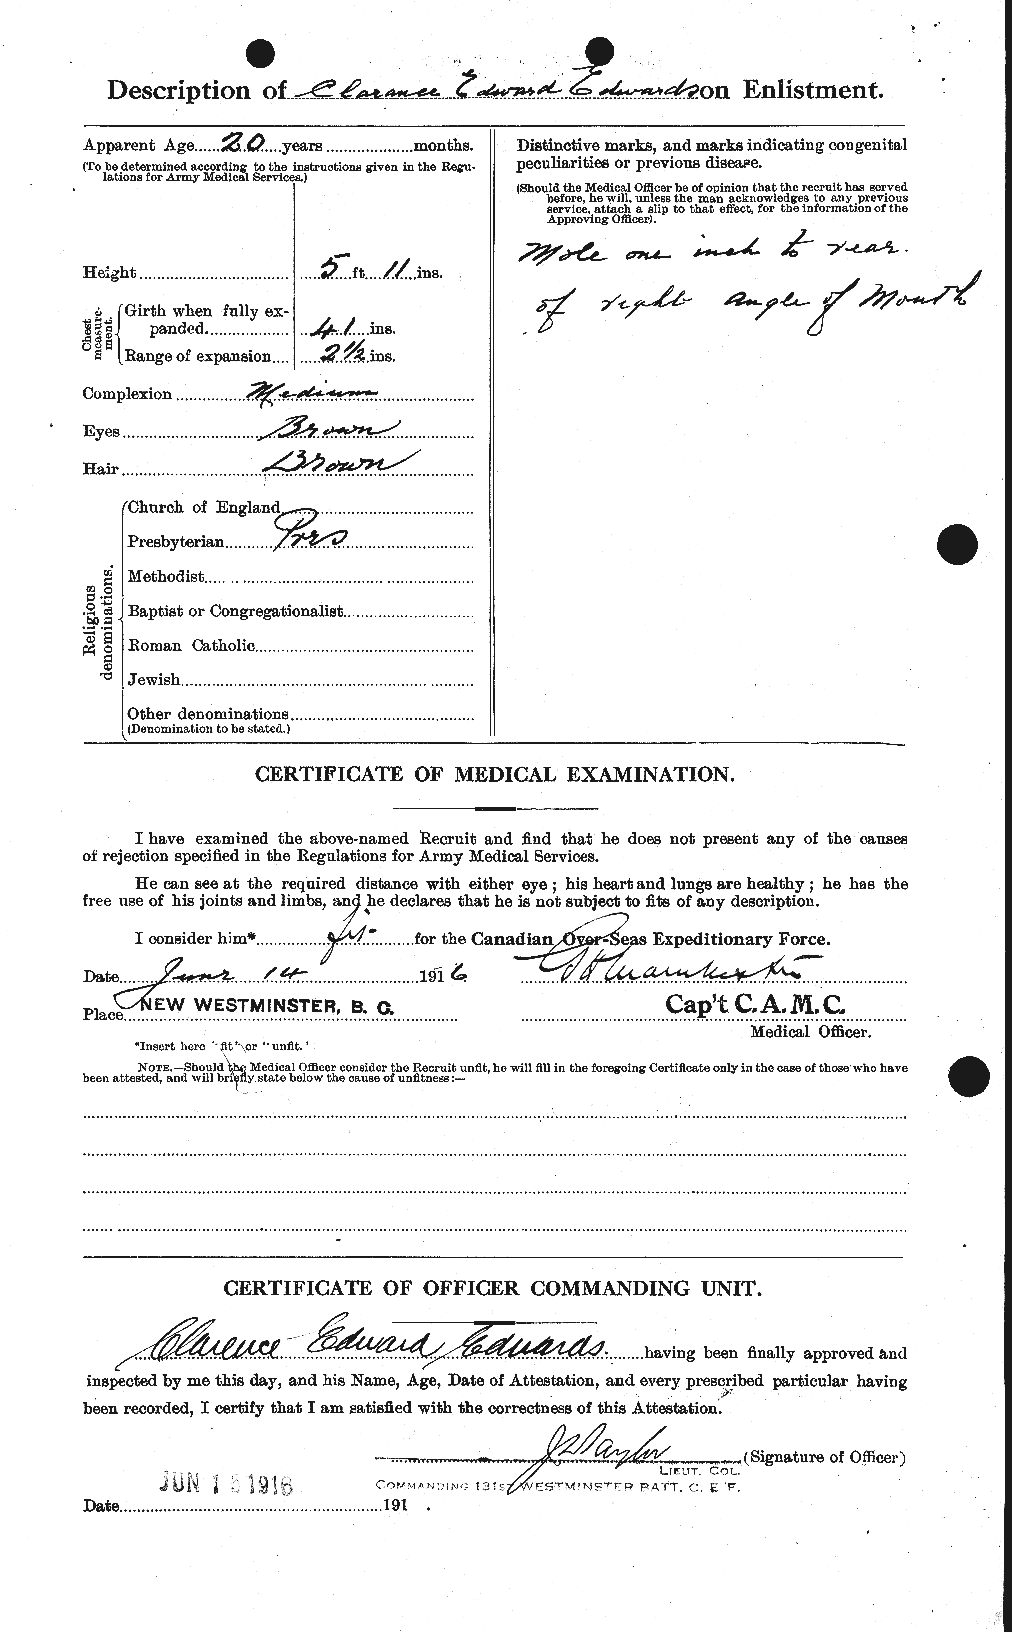 Personnel Records of the First World War - CEF 307854b